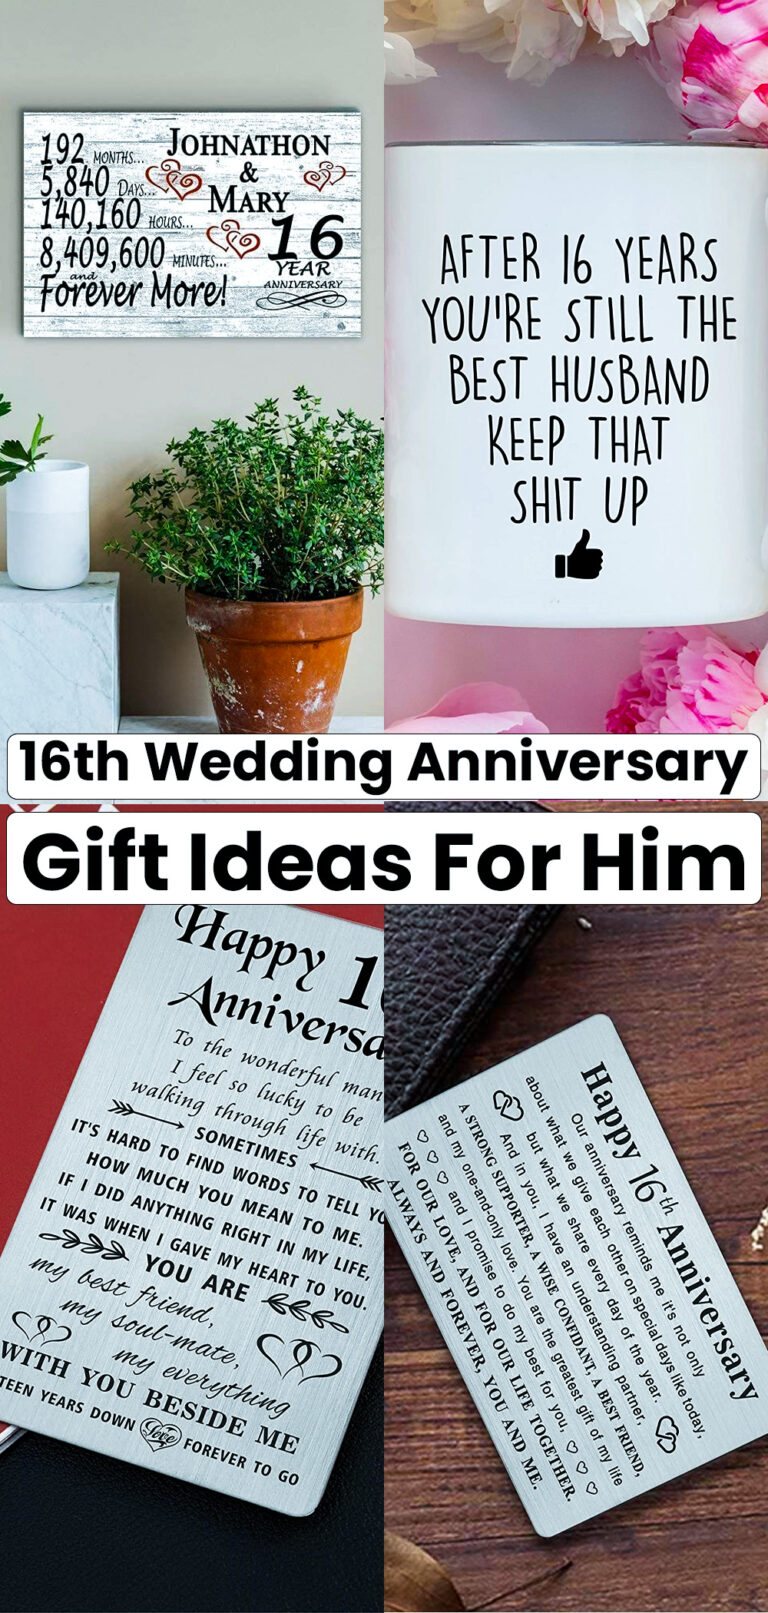 16th Wedding Anniversary Gift Ideas for Him